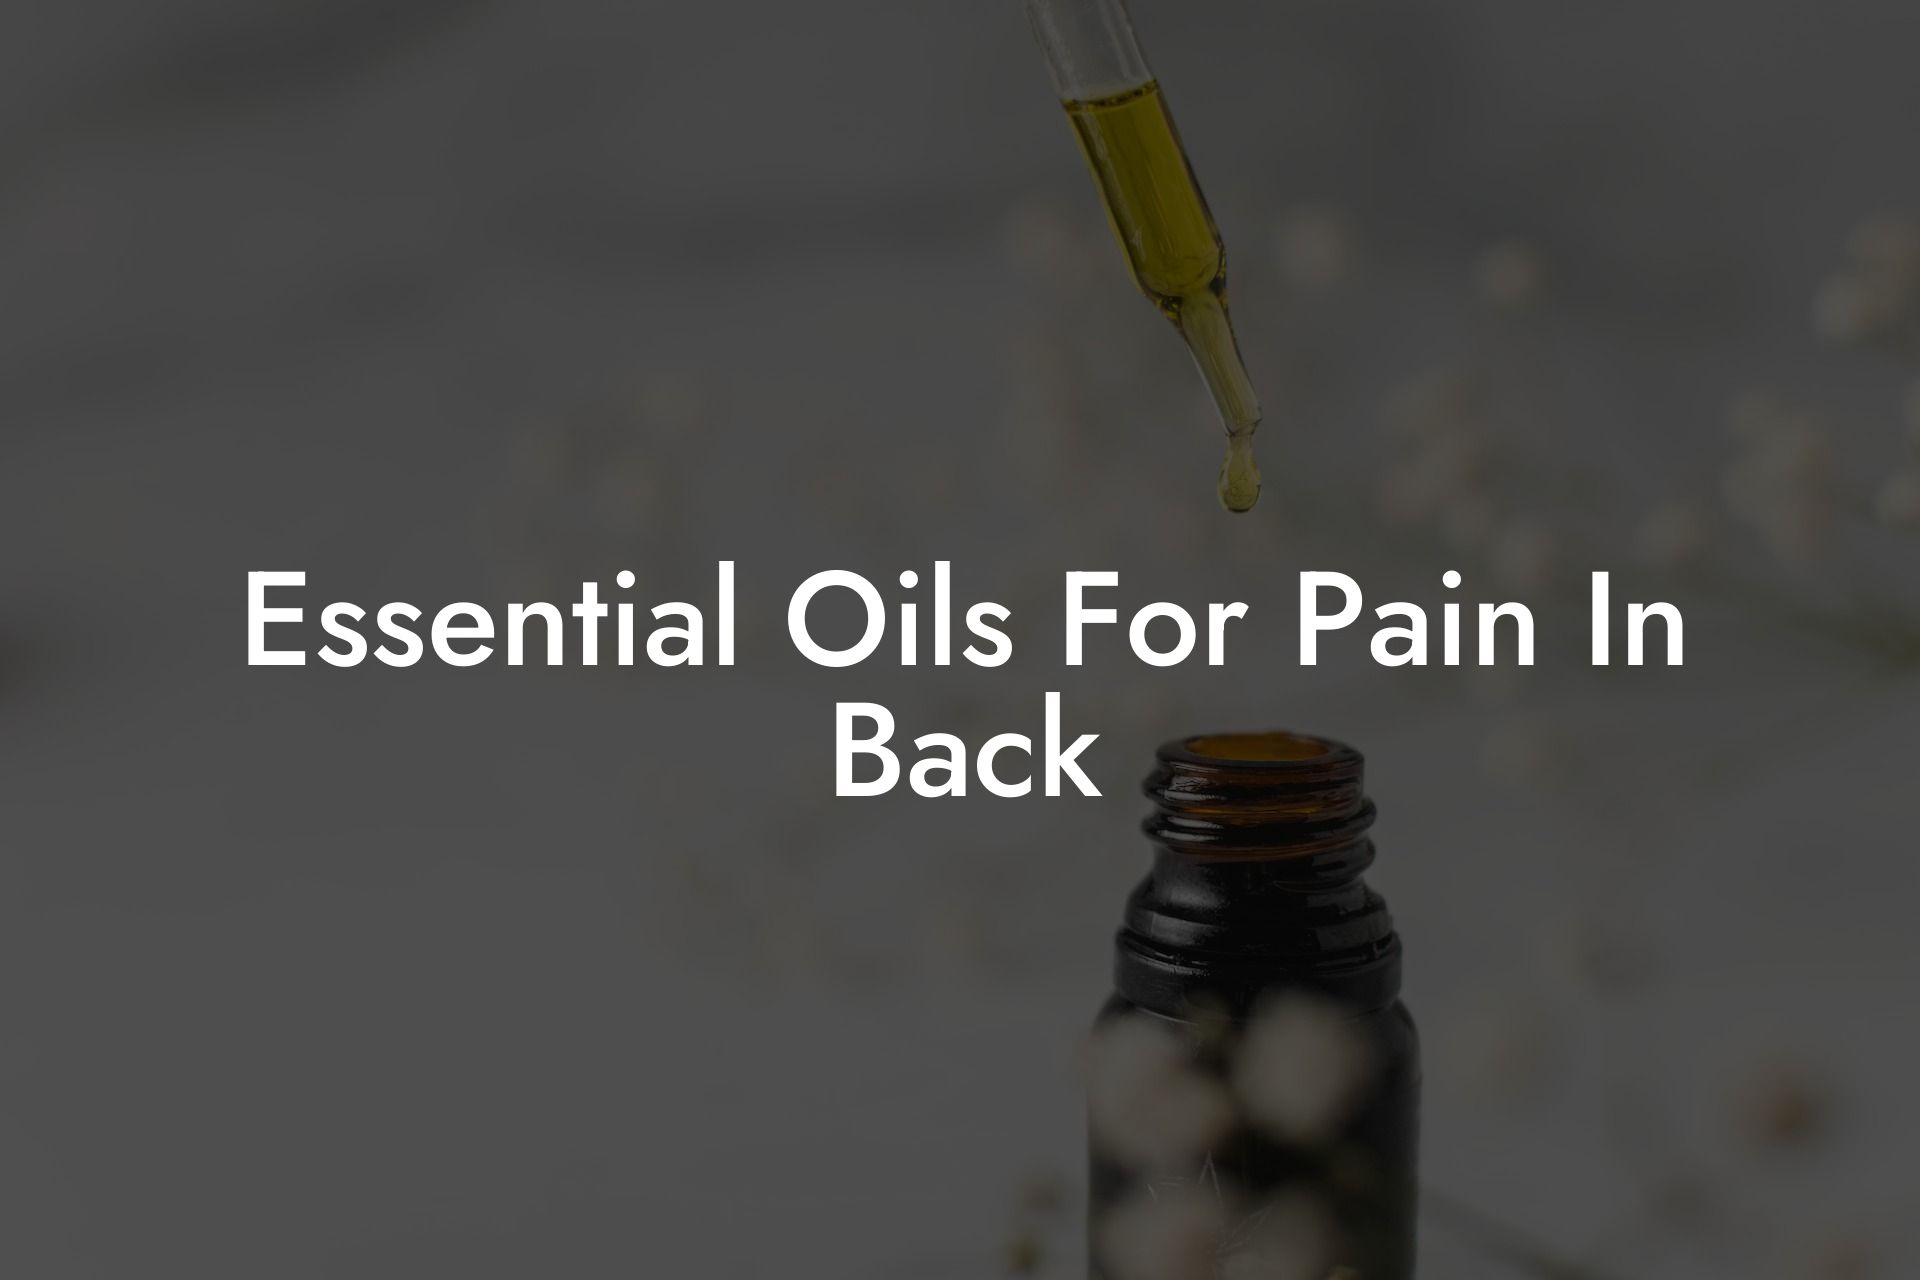 Essential Oils For Pain In Back